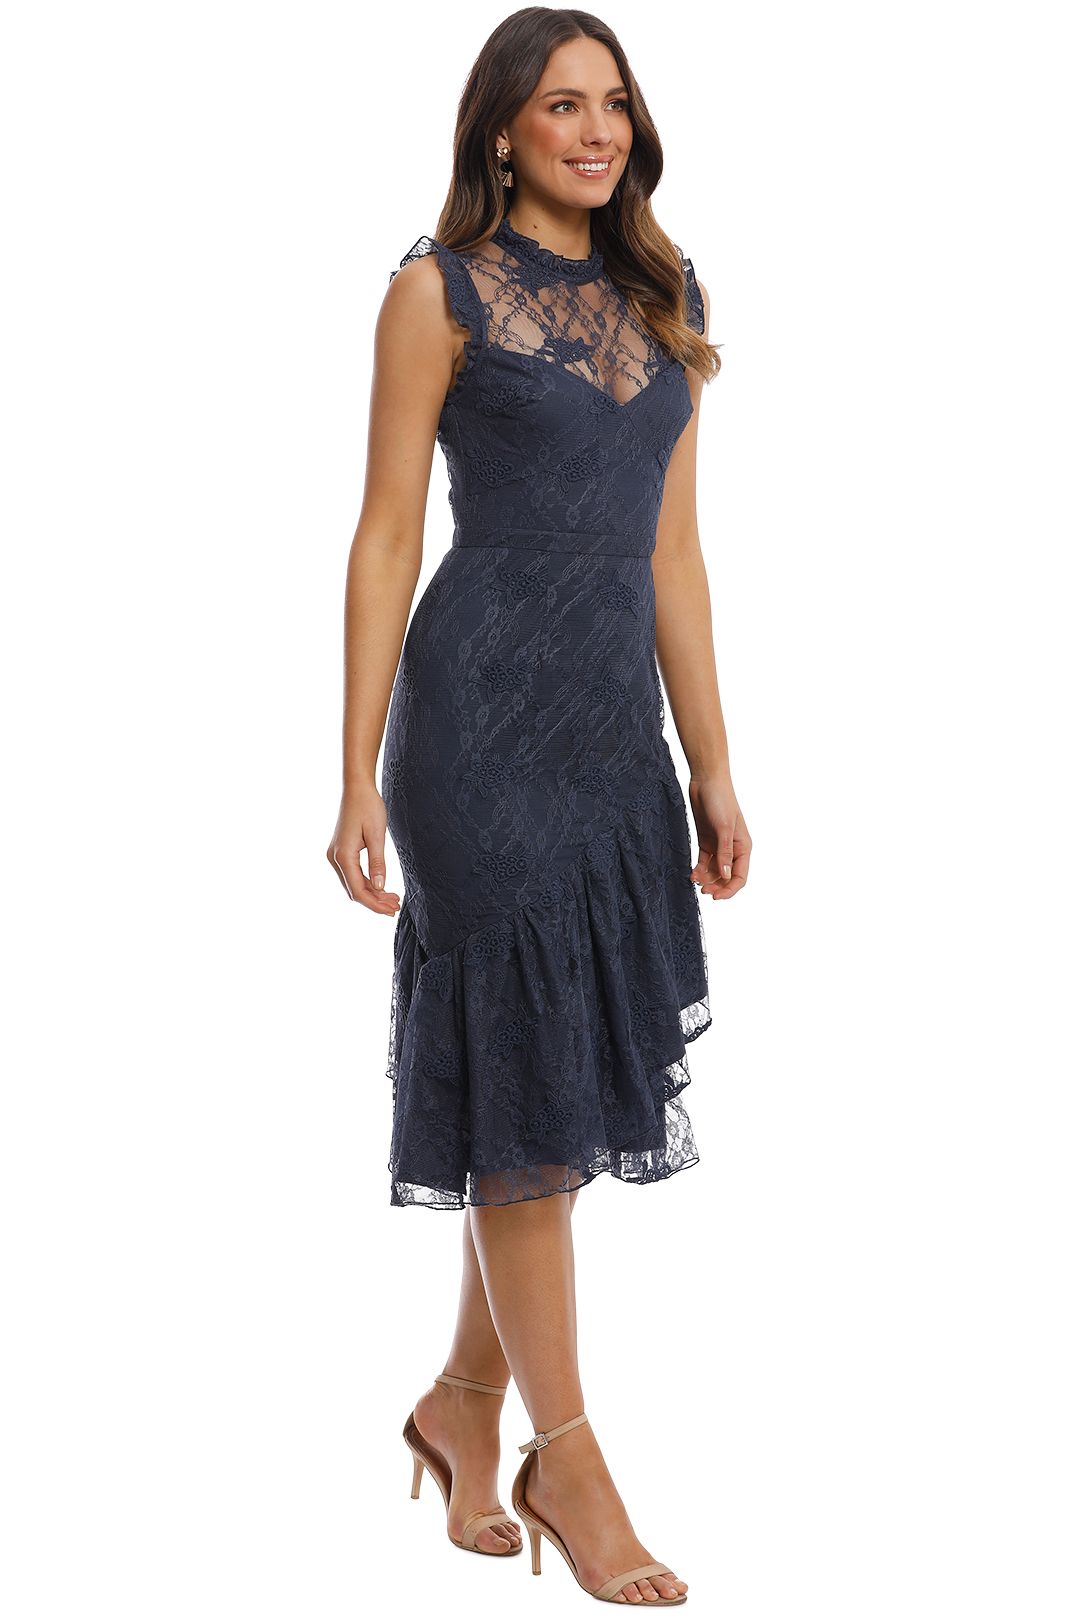 Cooper St - Peppermint Lace High Neck Dress - French Navy - Side